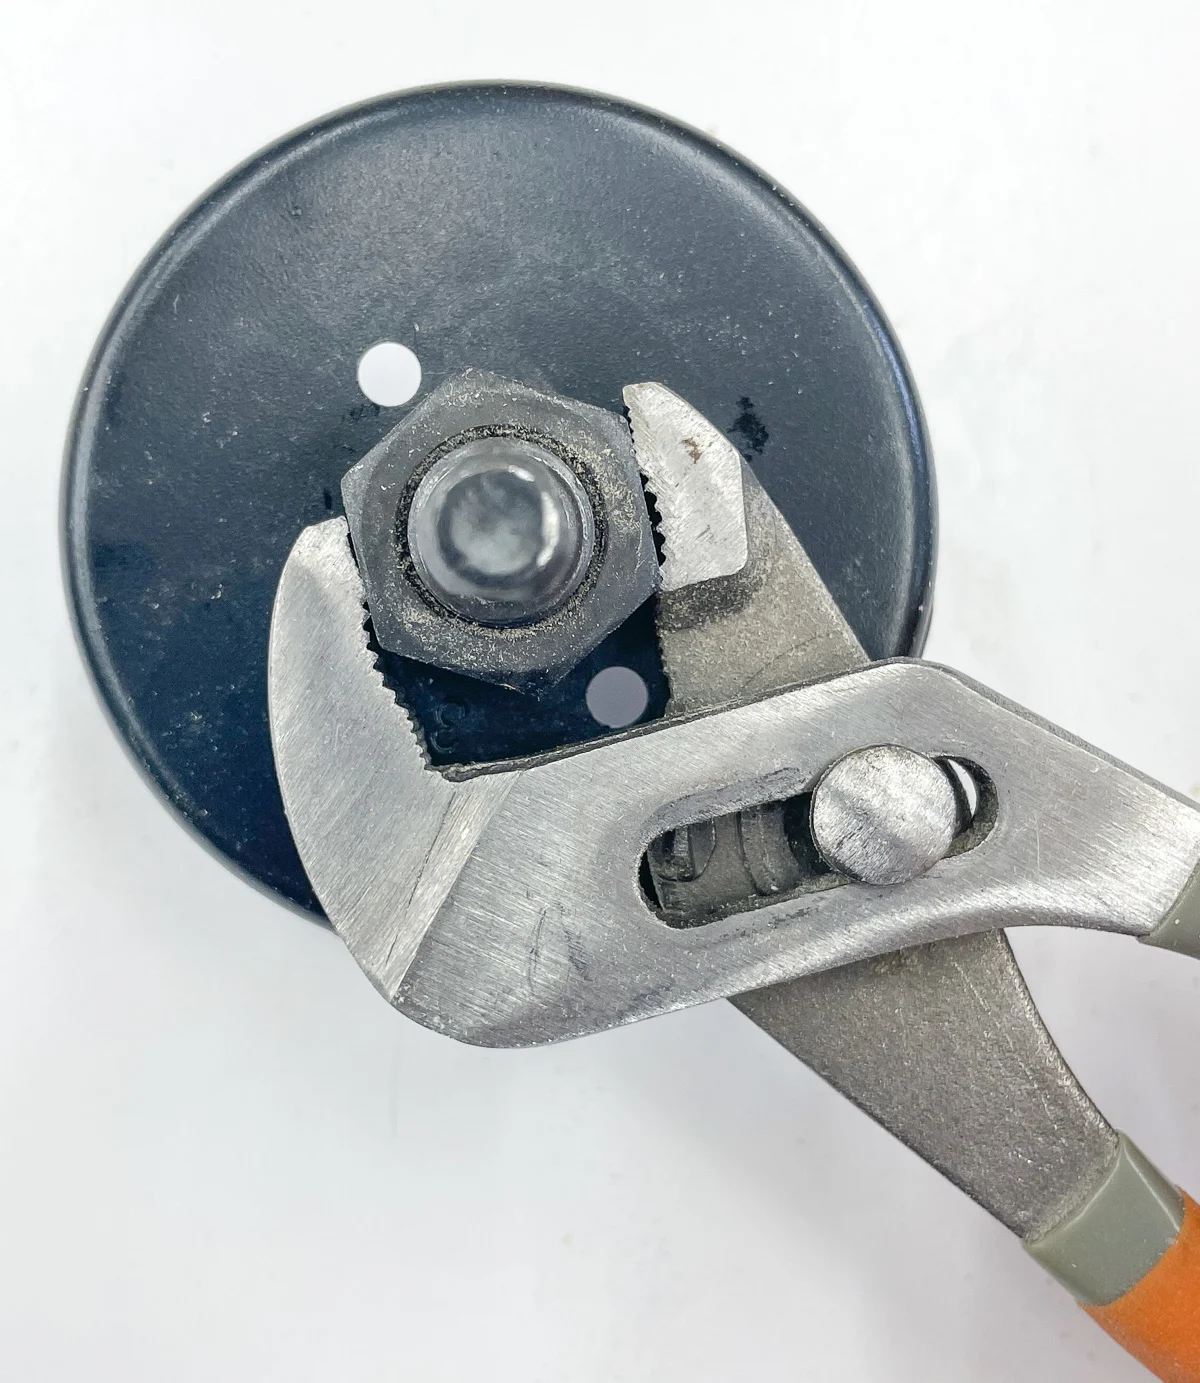 tightening hole saw nut with an adjustable wrench